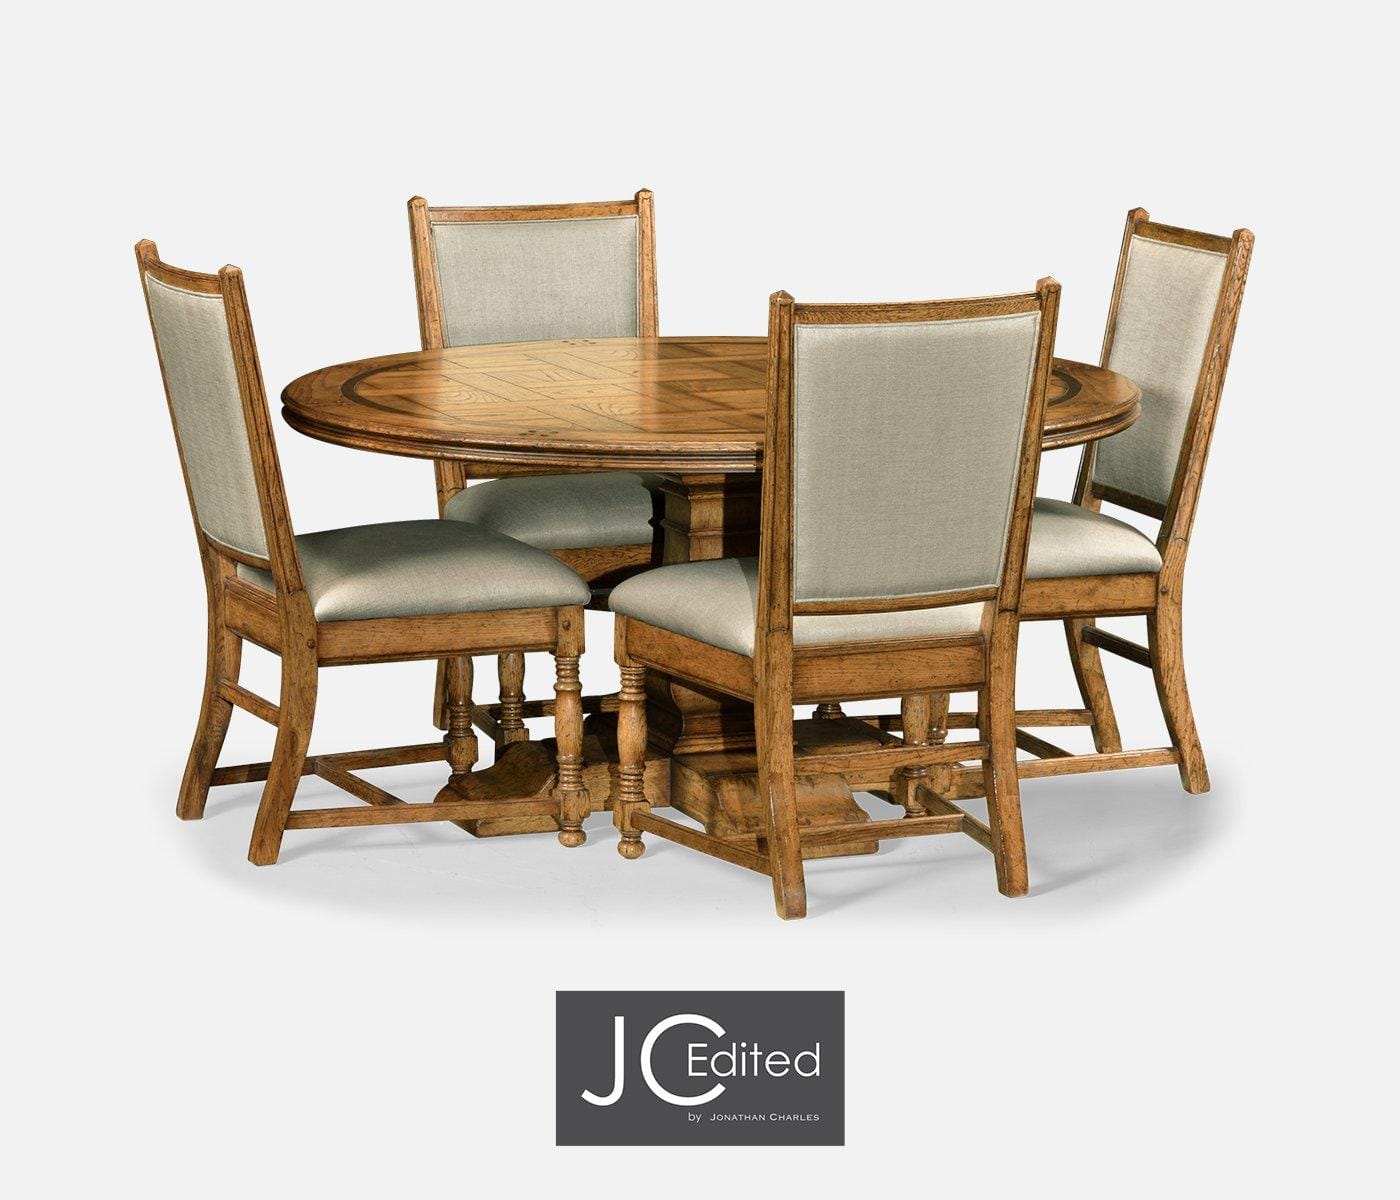 Jonathan Charles Dining Jonathan Charles Round Dining Table in Brown Chestnut - Medium House of Isabella UK